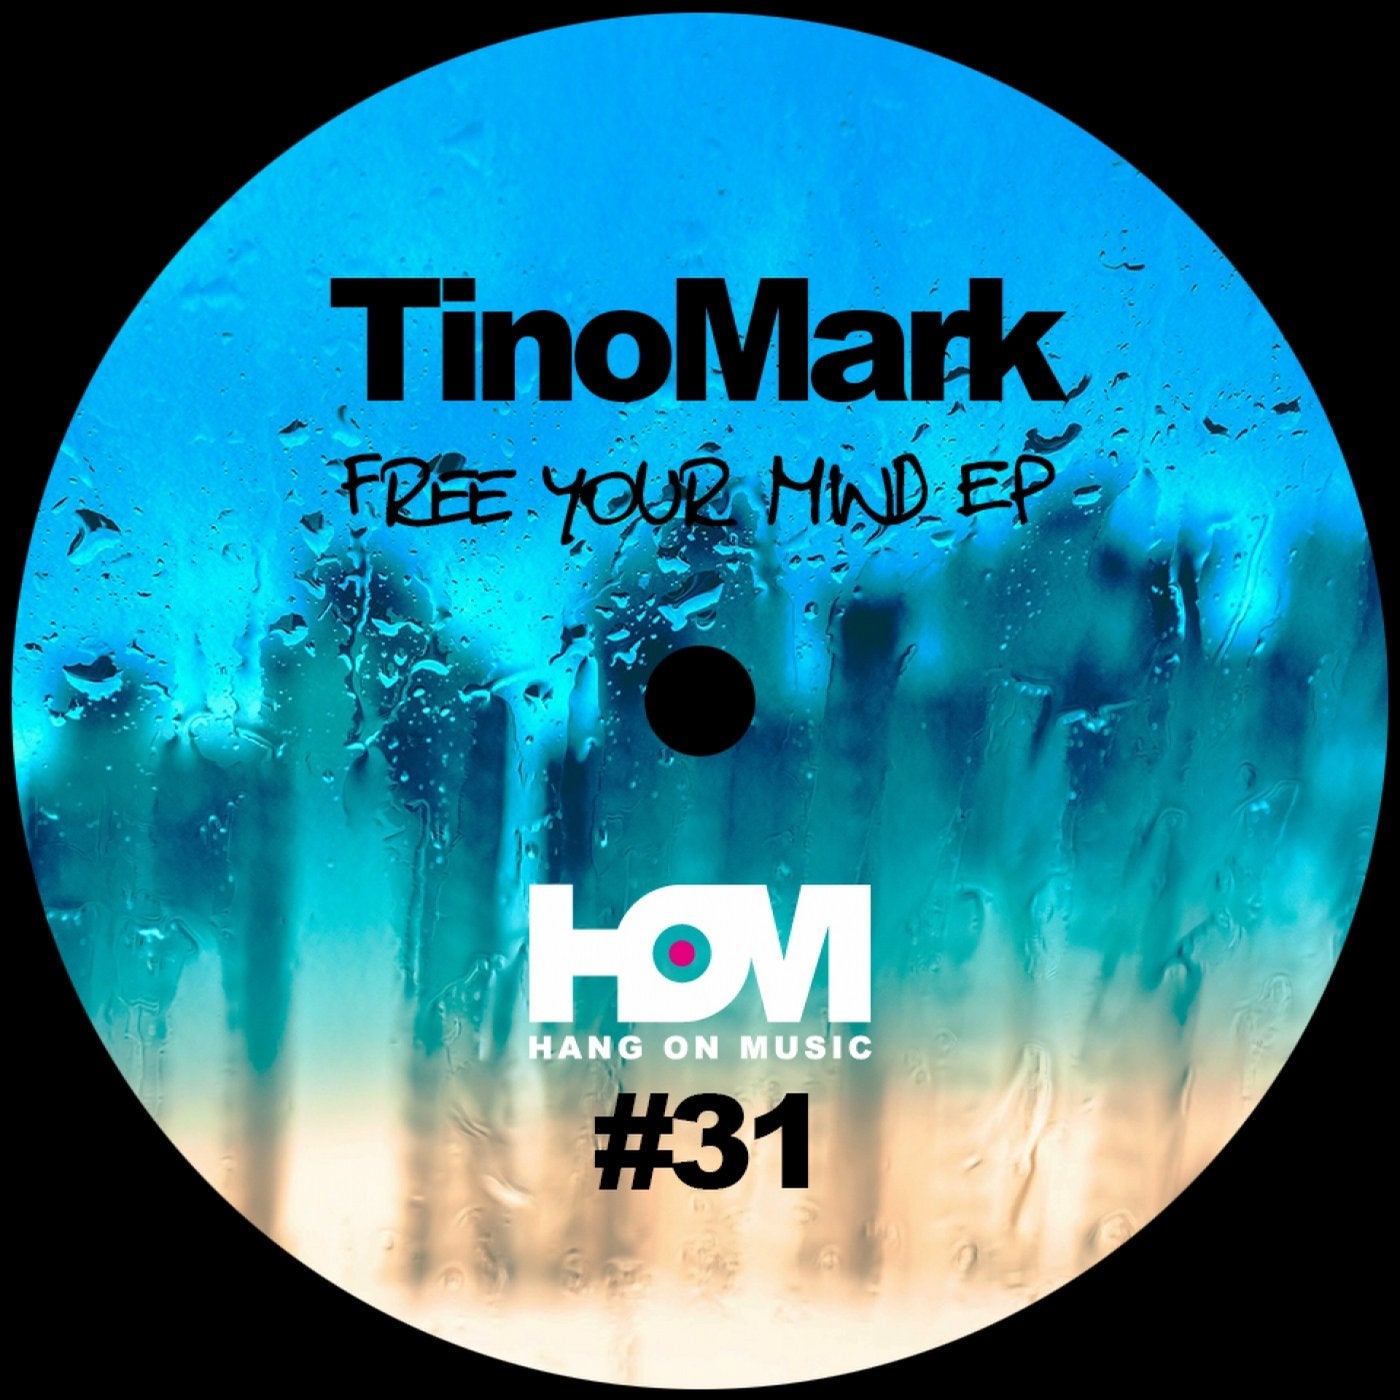 Free your Mind EP